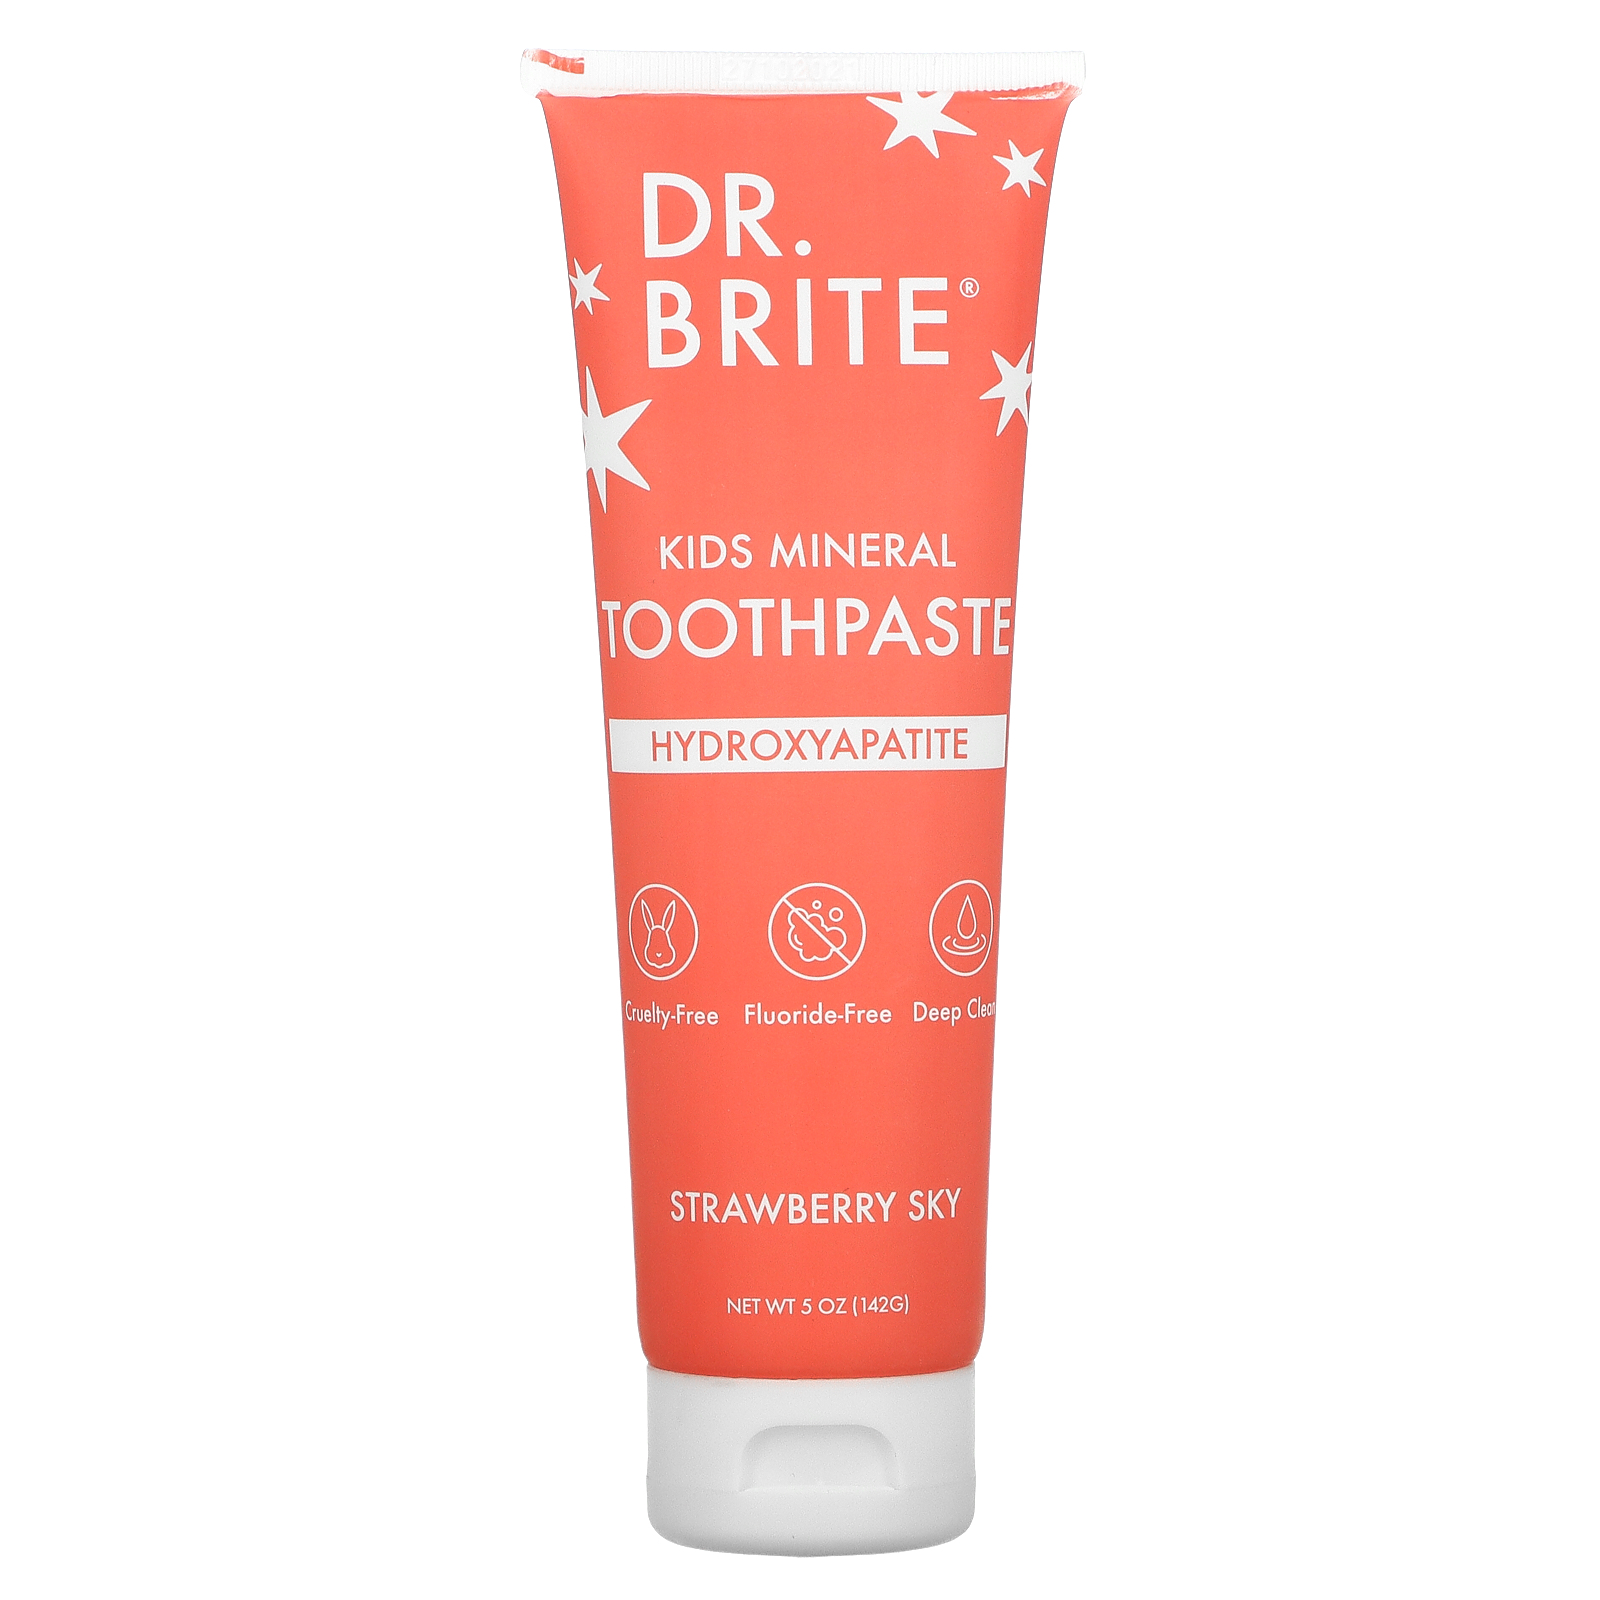 Kids Mineral Strawberry Sky Toothpaste-brite product available at family pharmacy online buy now at qatar doha